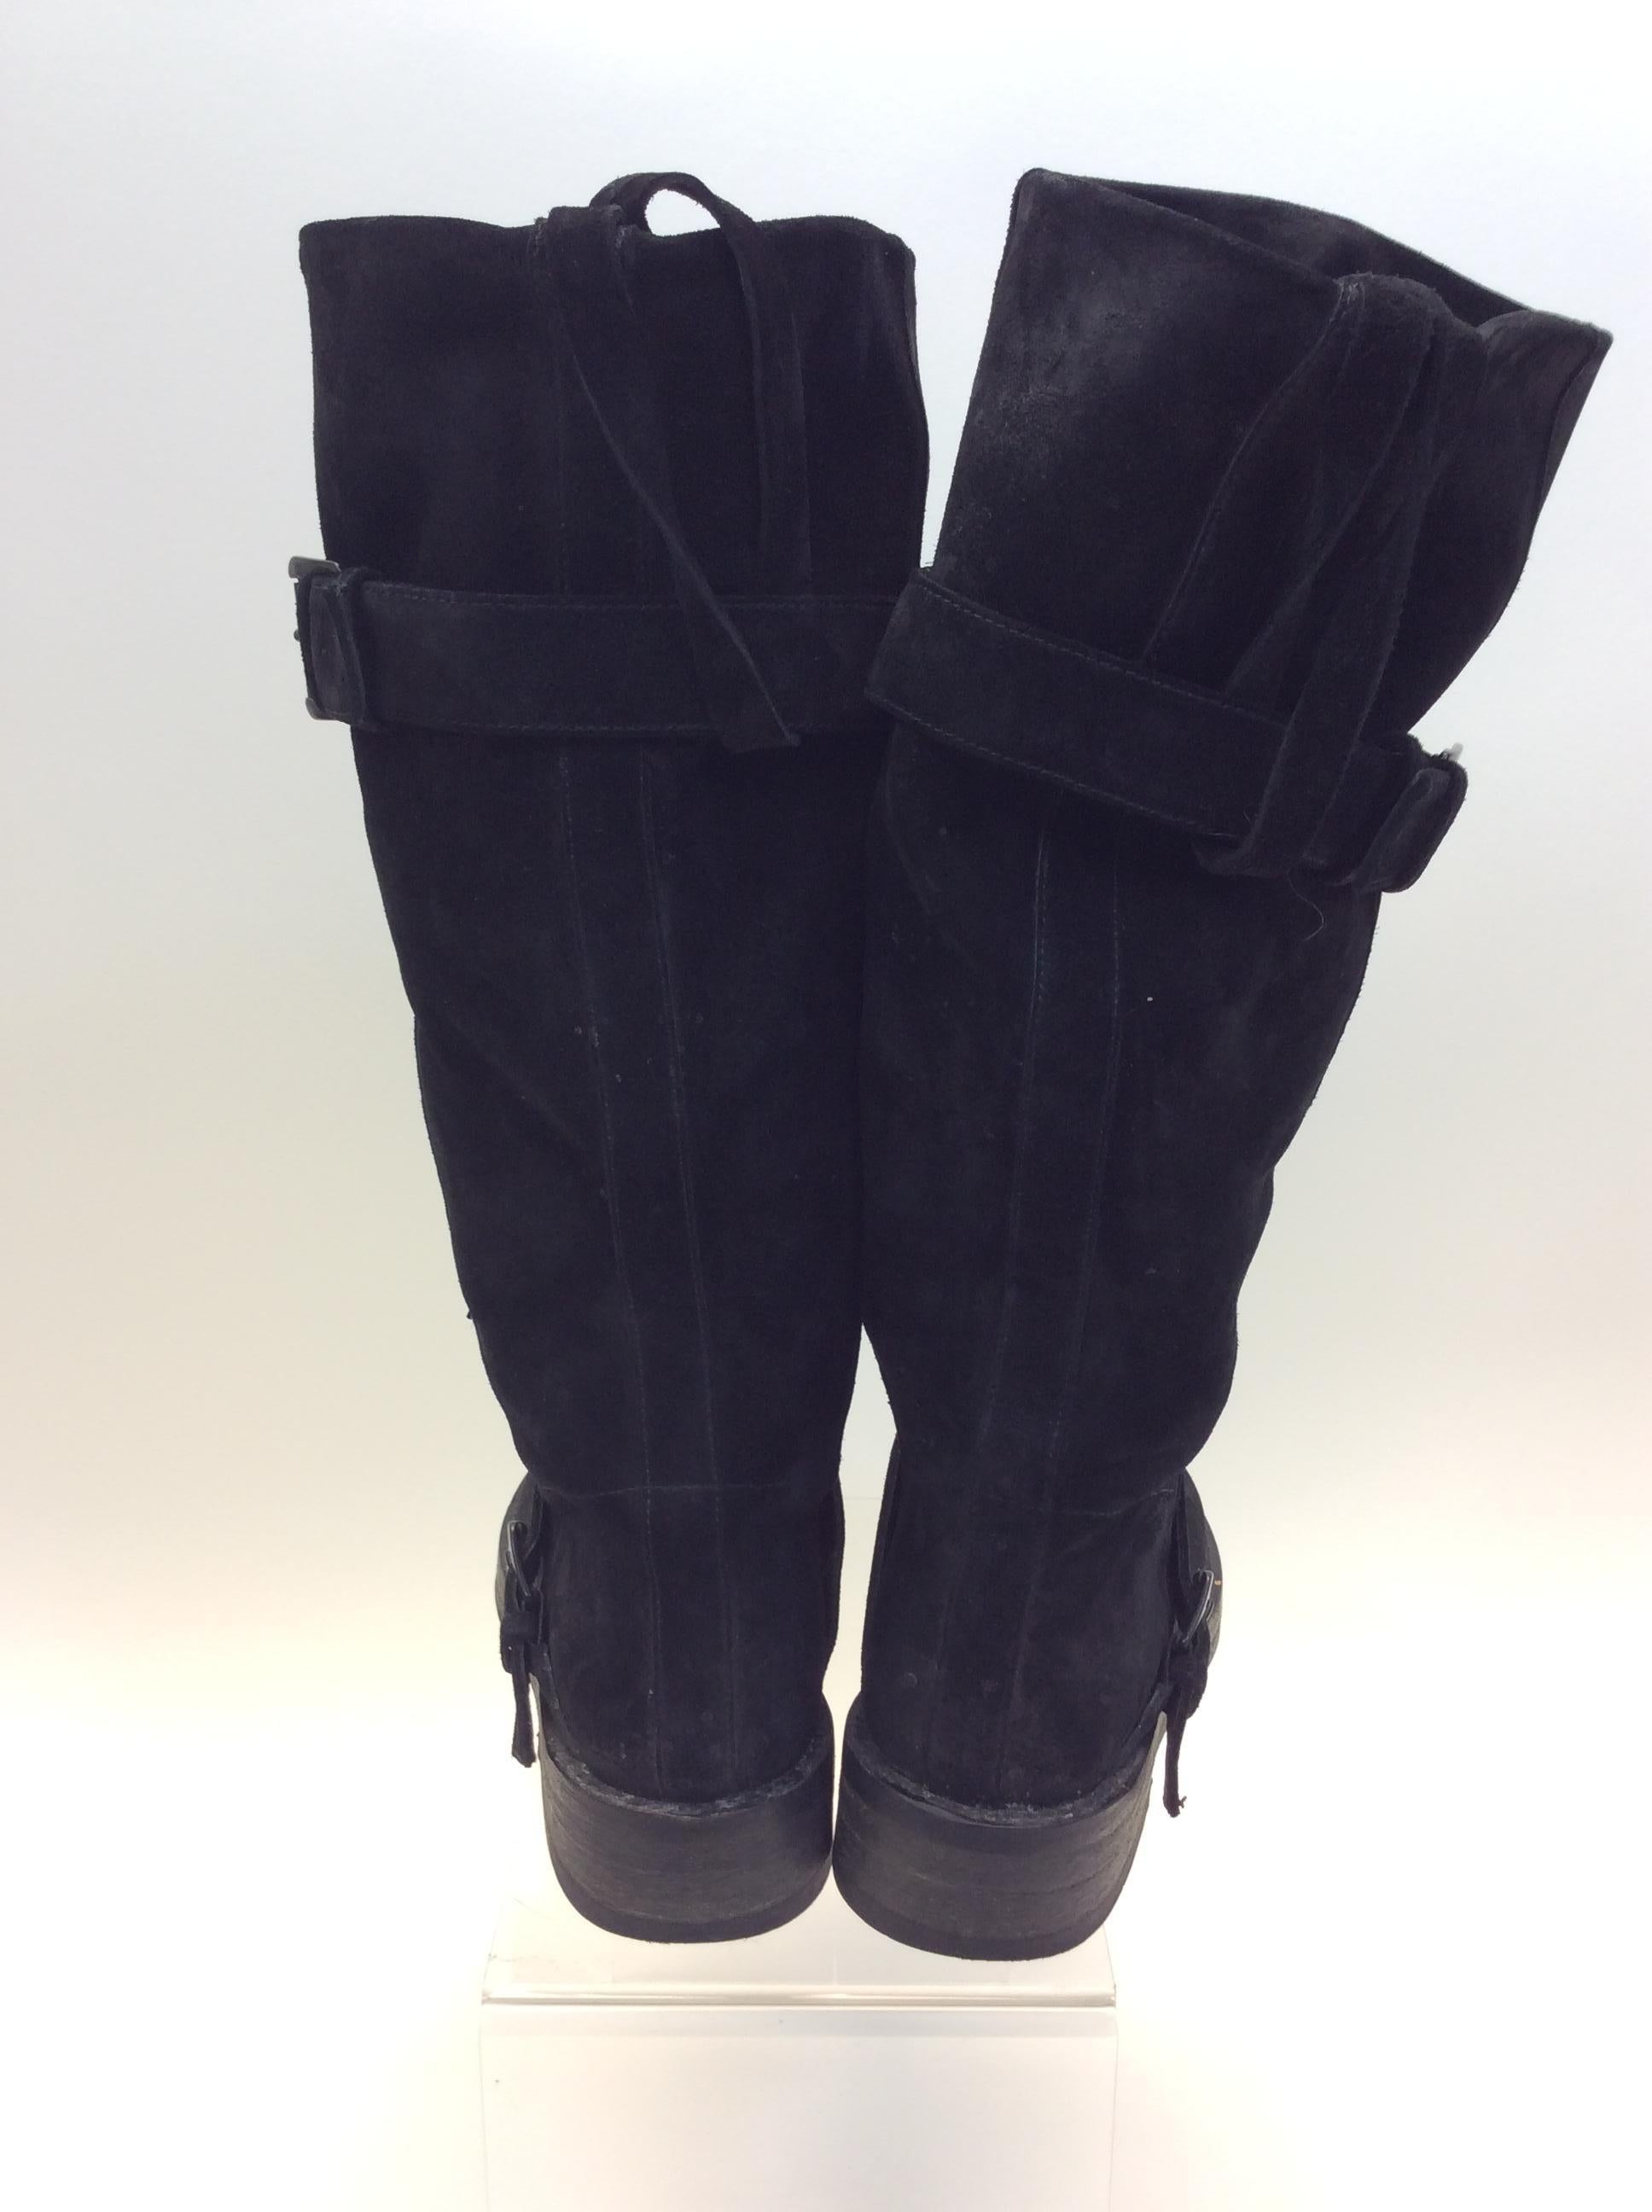 Ann Demeulemeester Black Suede Knee-High Boots In Good Condition For Sale In Narberth, PA